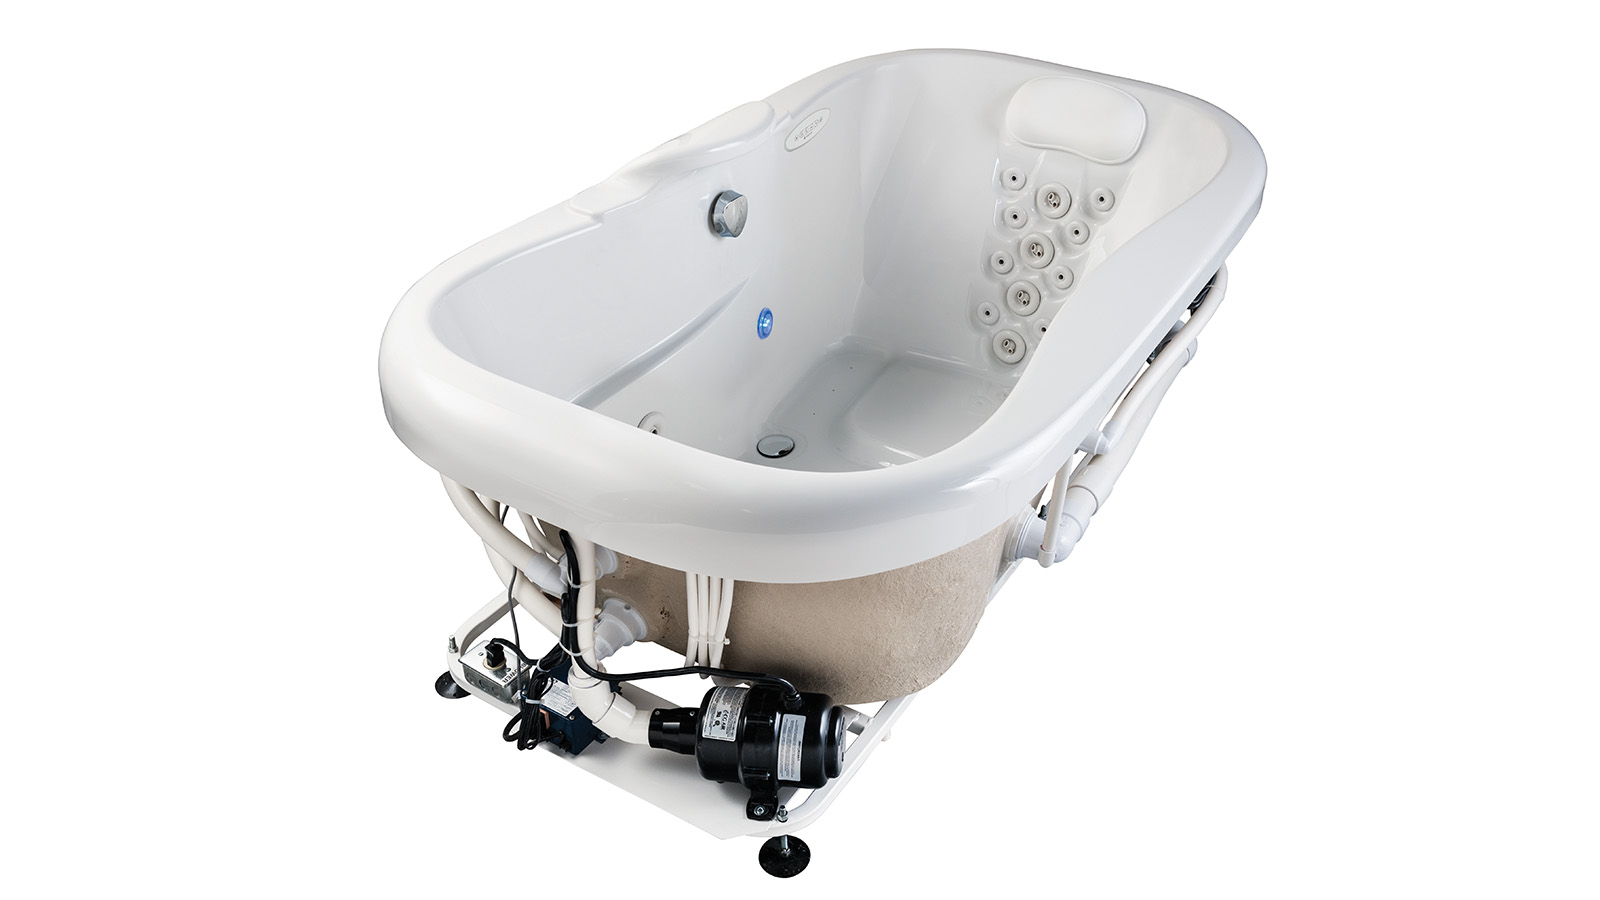 Image of a whirlpool system in an infinity tub.